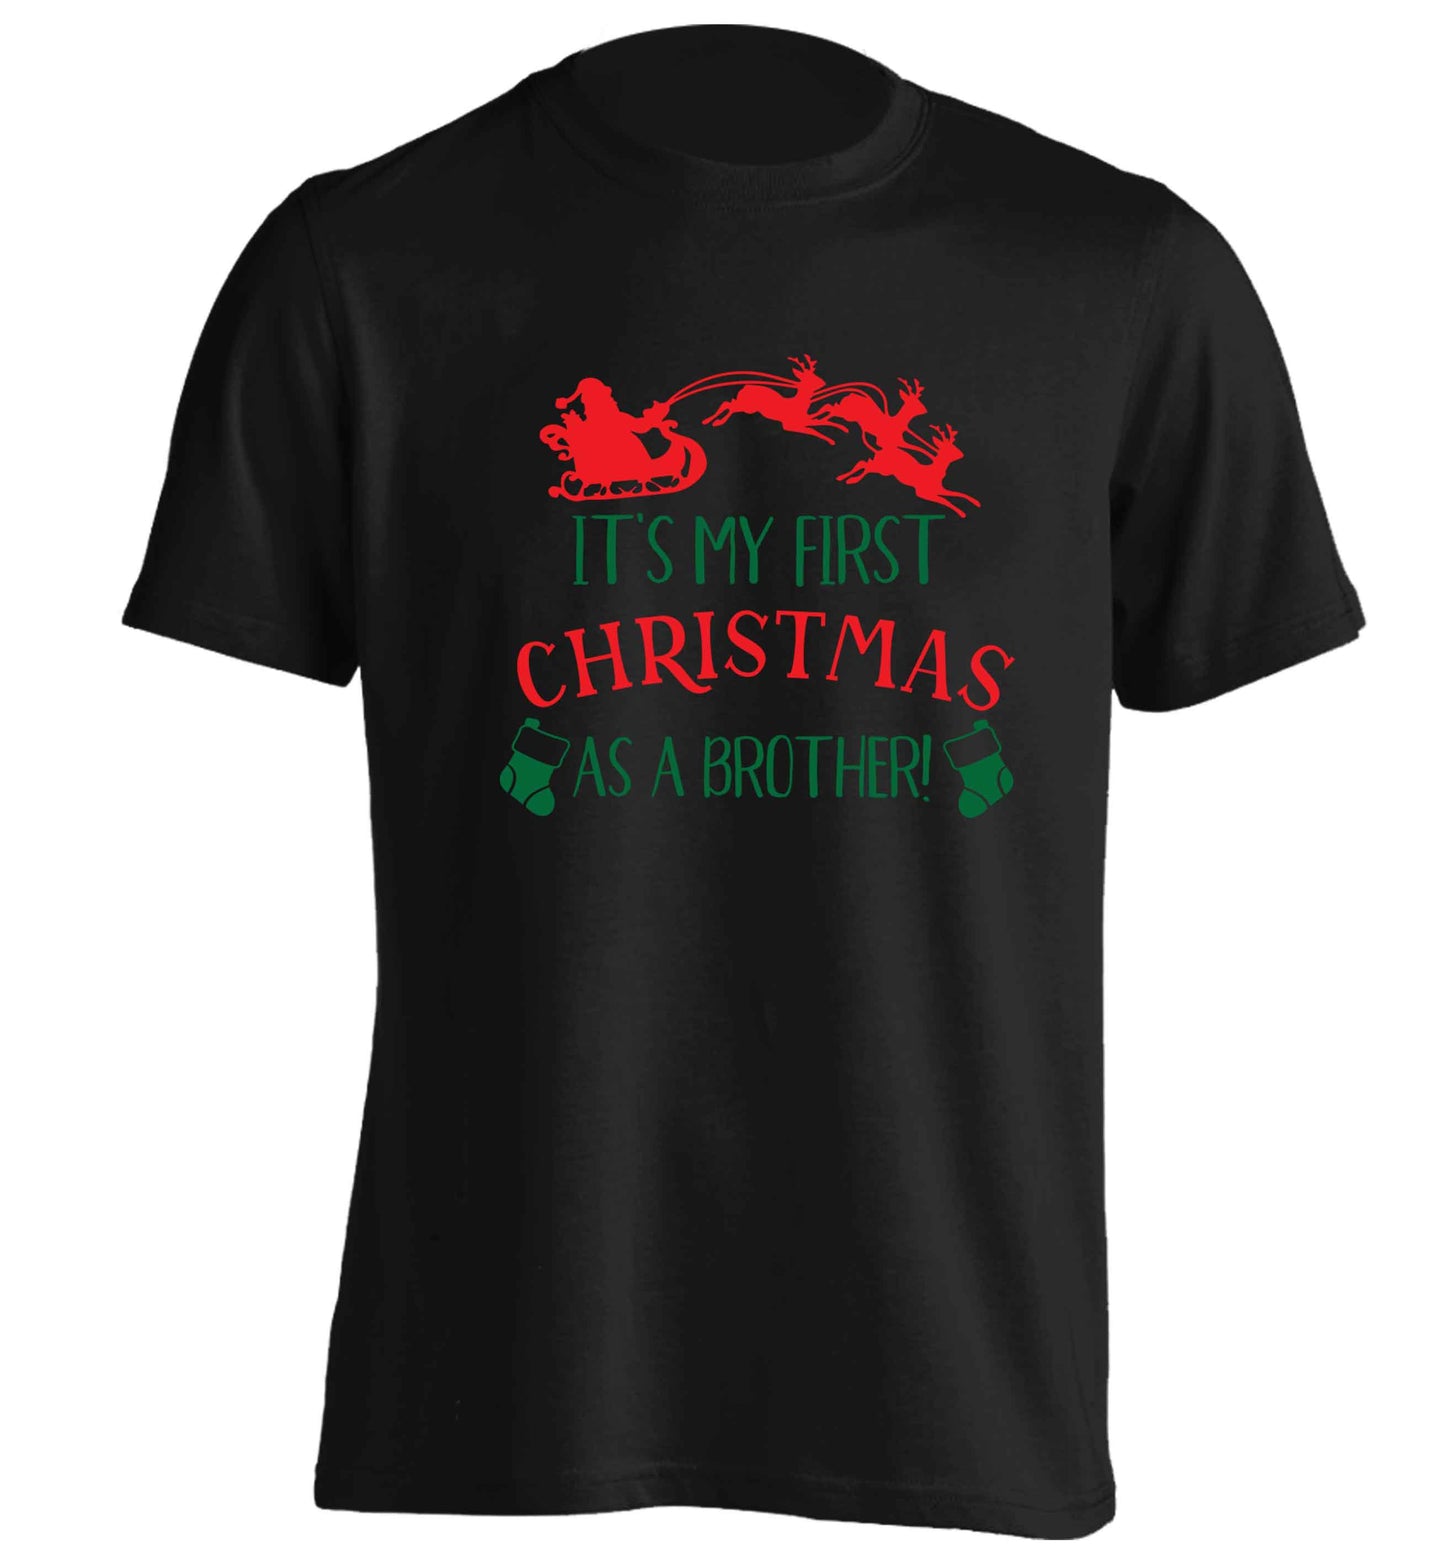 It's my first Christmas as a brother! adults unisex black Tshirt 2XL